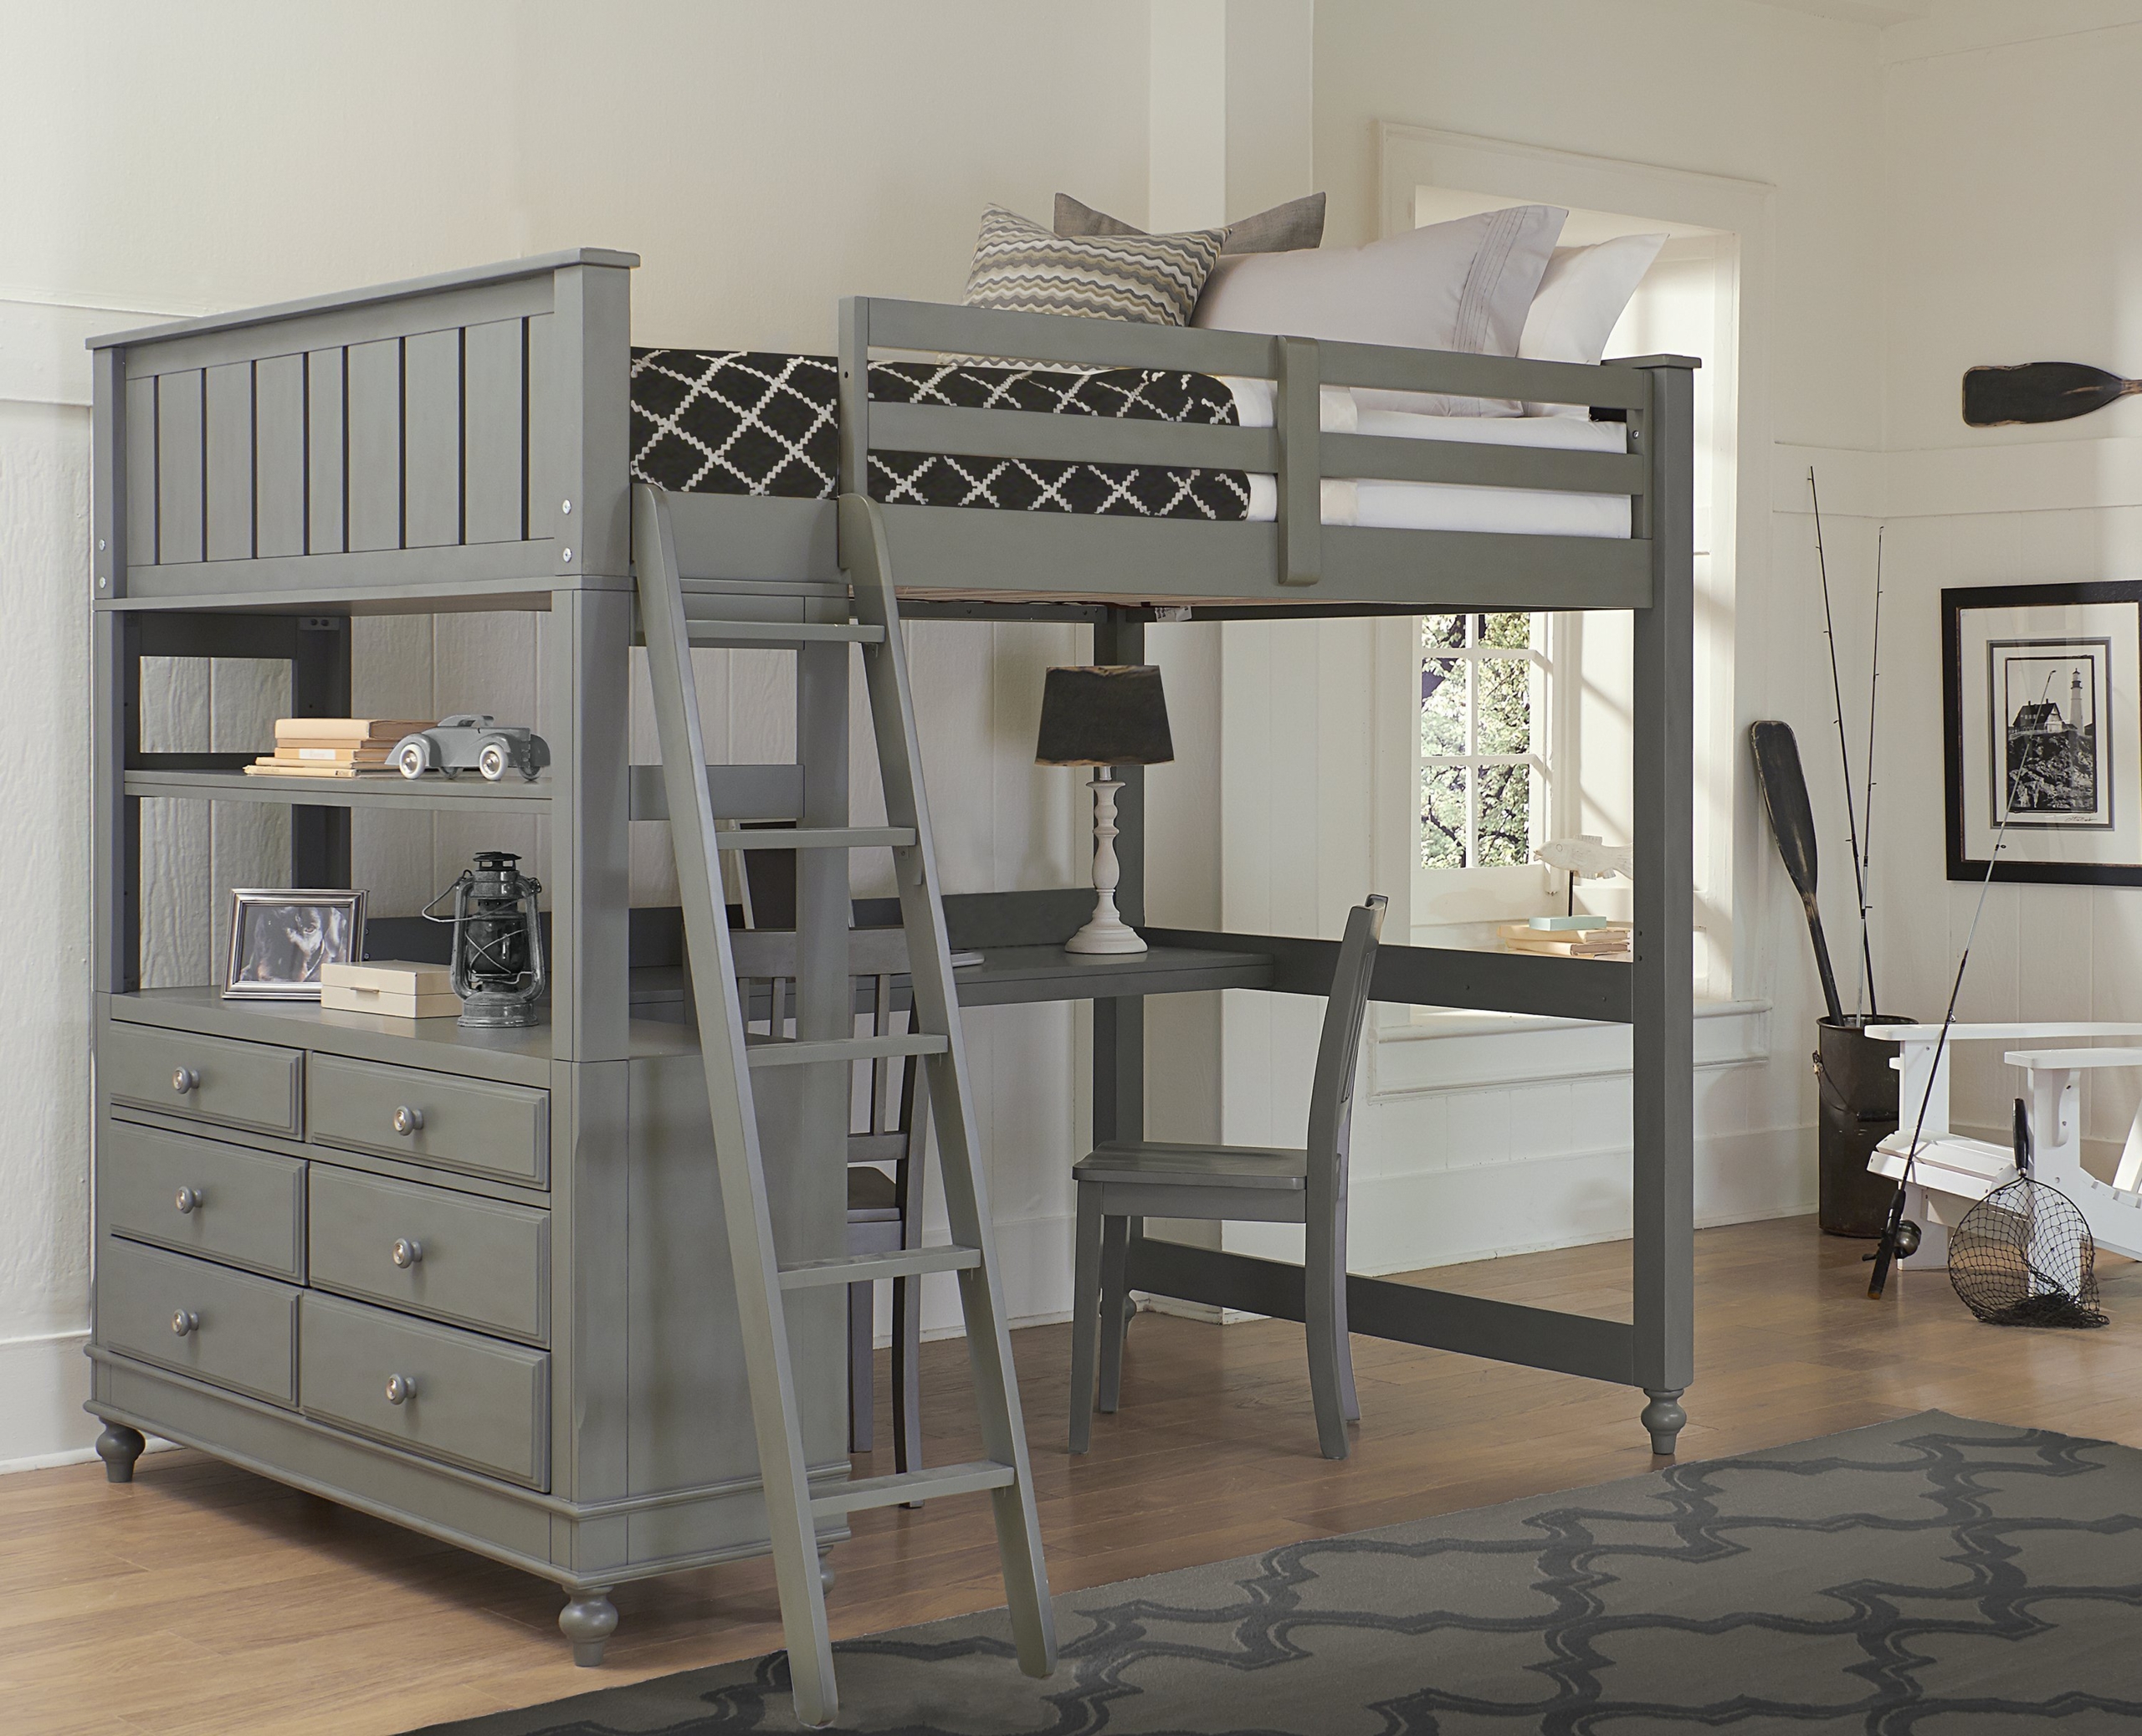 Bunk Beds With Dressers Visualhunt, Bunk Bed Desk Trundle Combo